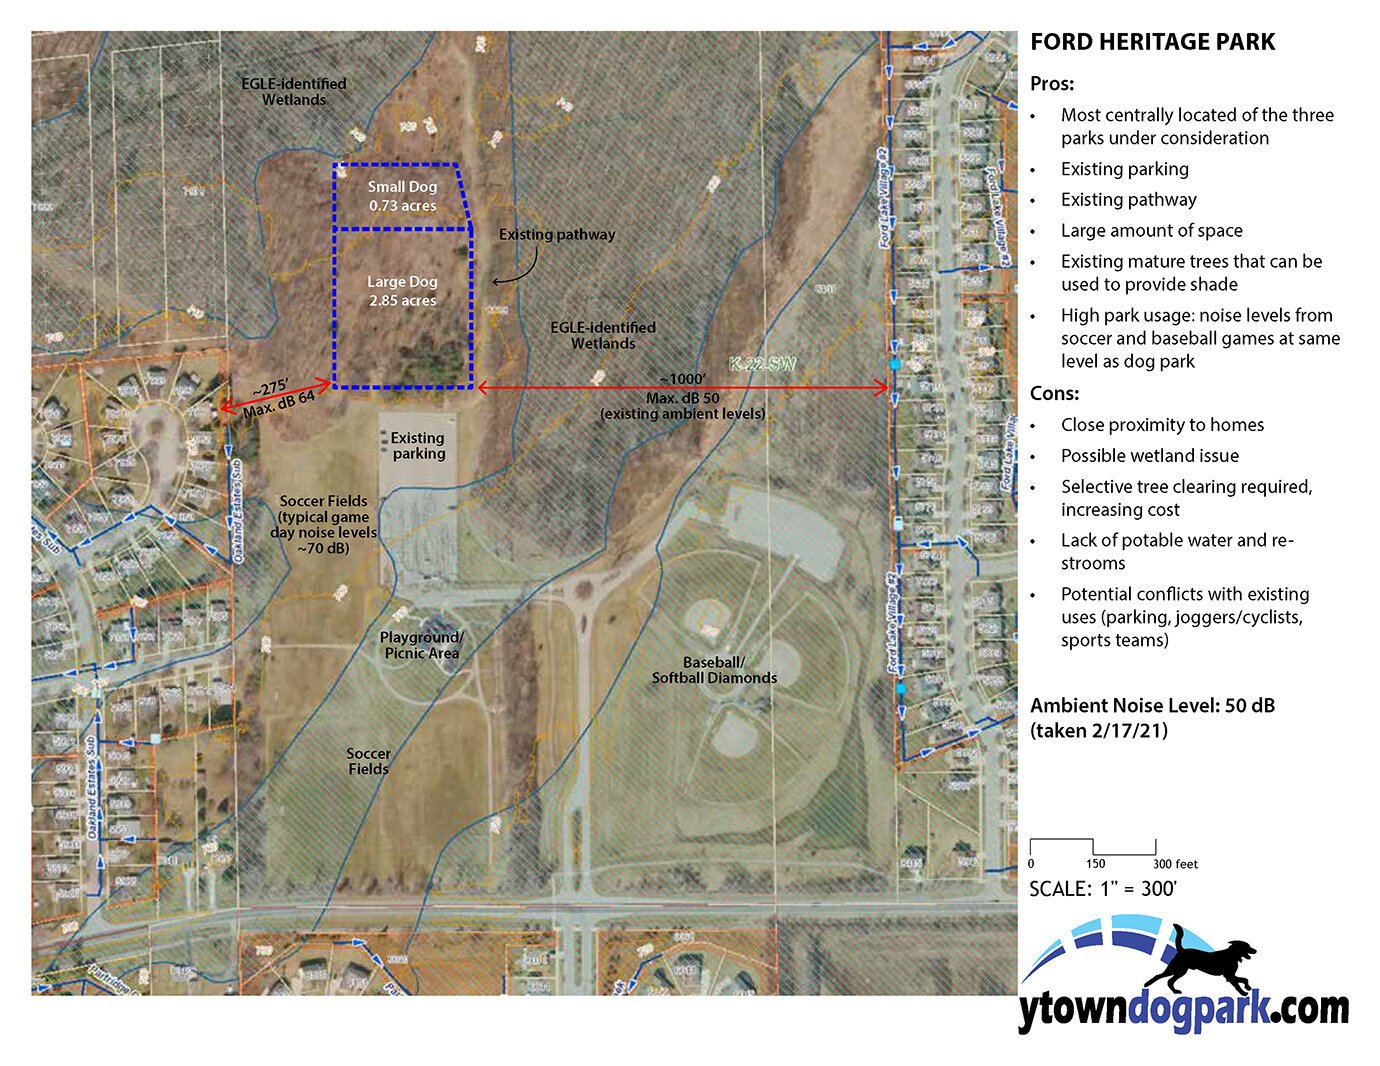 A map of the proposed dog park at Ford Heritage Park.